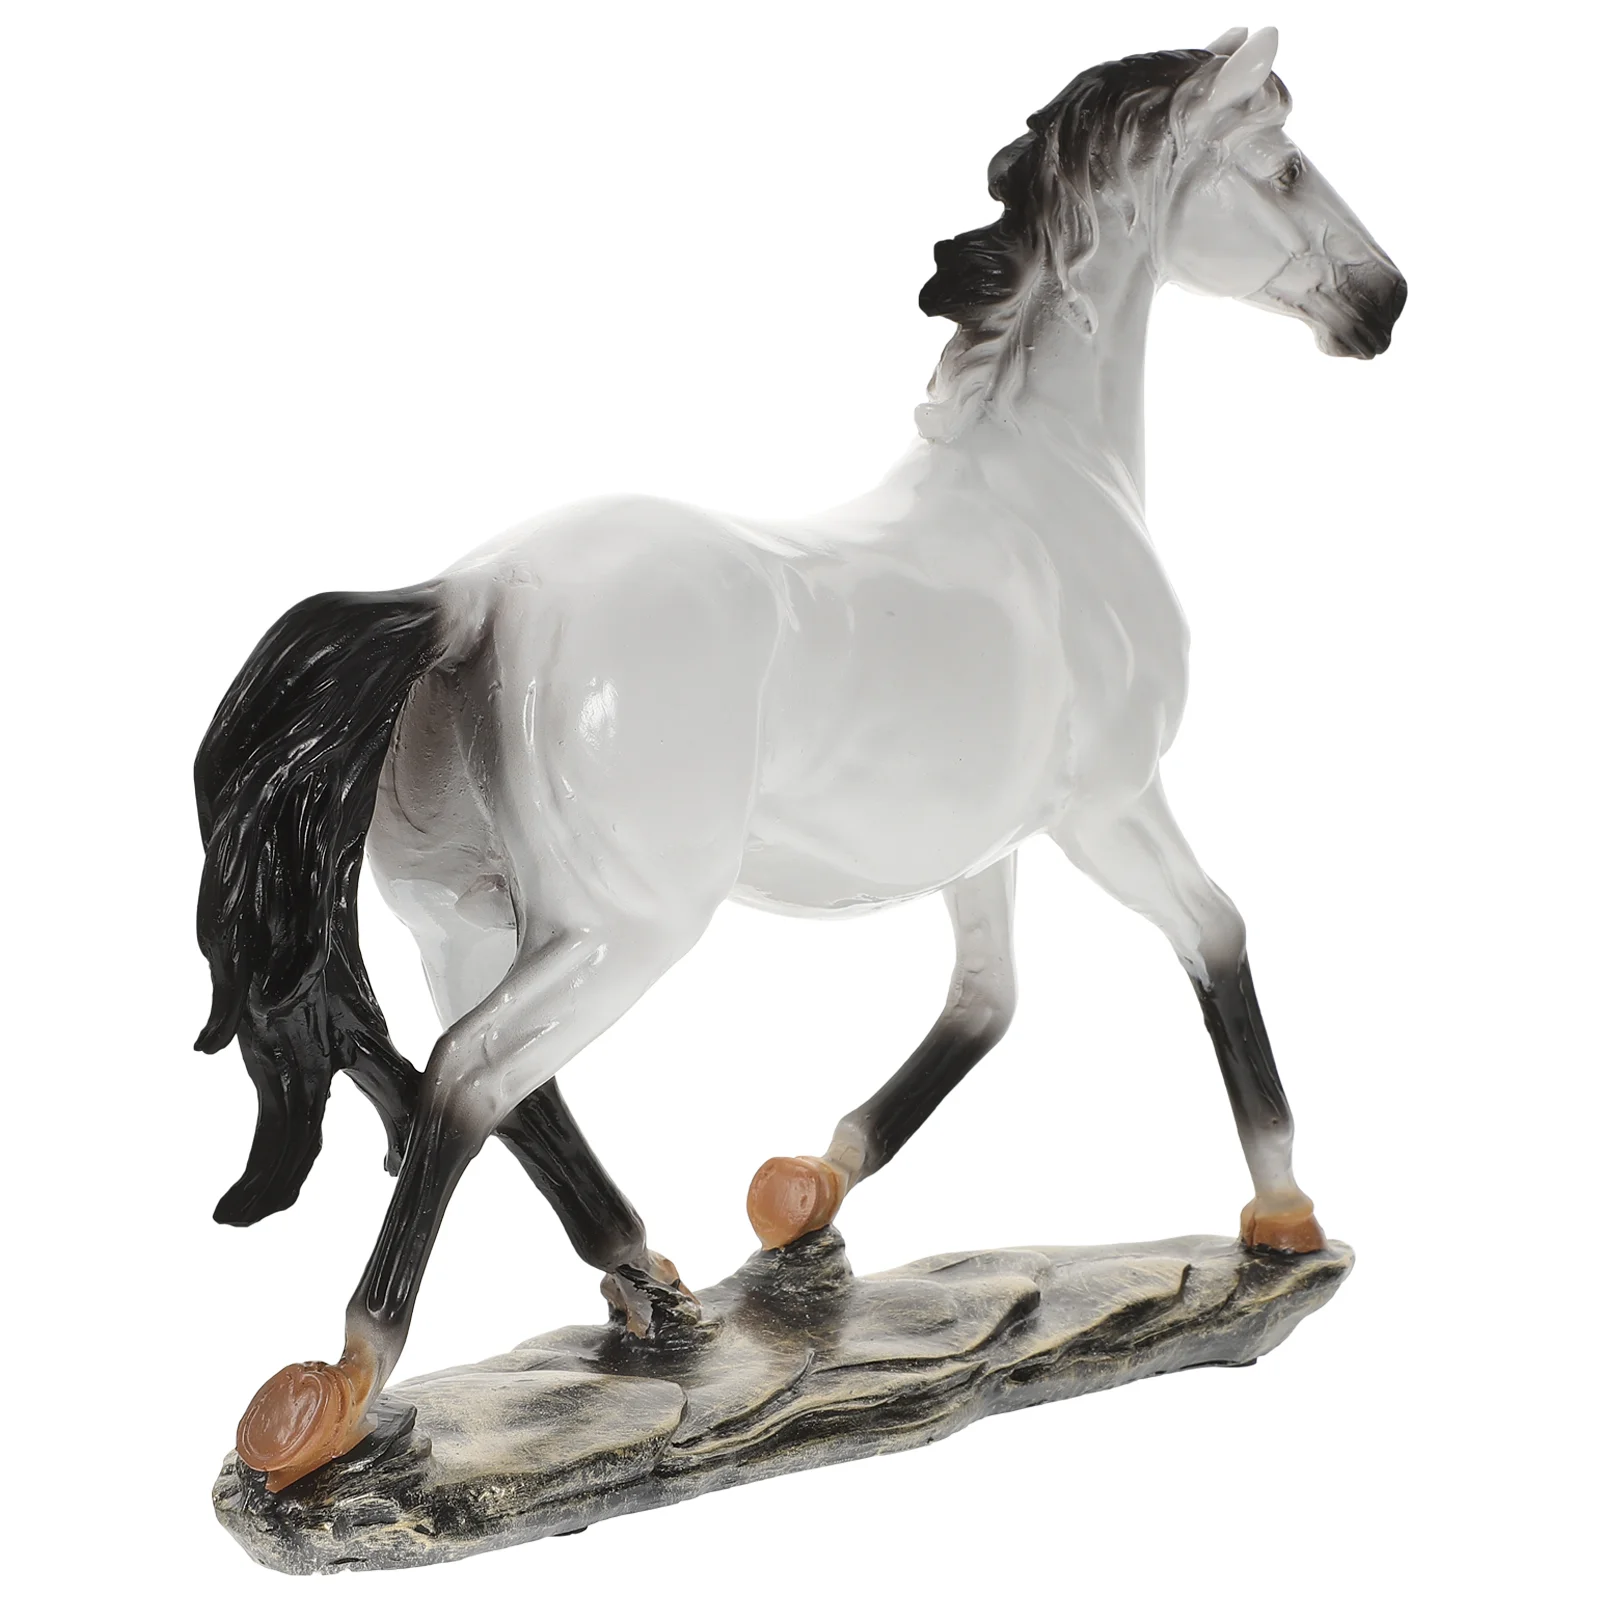 

Horse Costume Decoration Resin Animal Sculpture Vintage Chinese Style Creative Figurine Synthetic Desktop Adornment Office